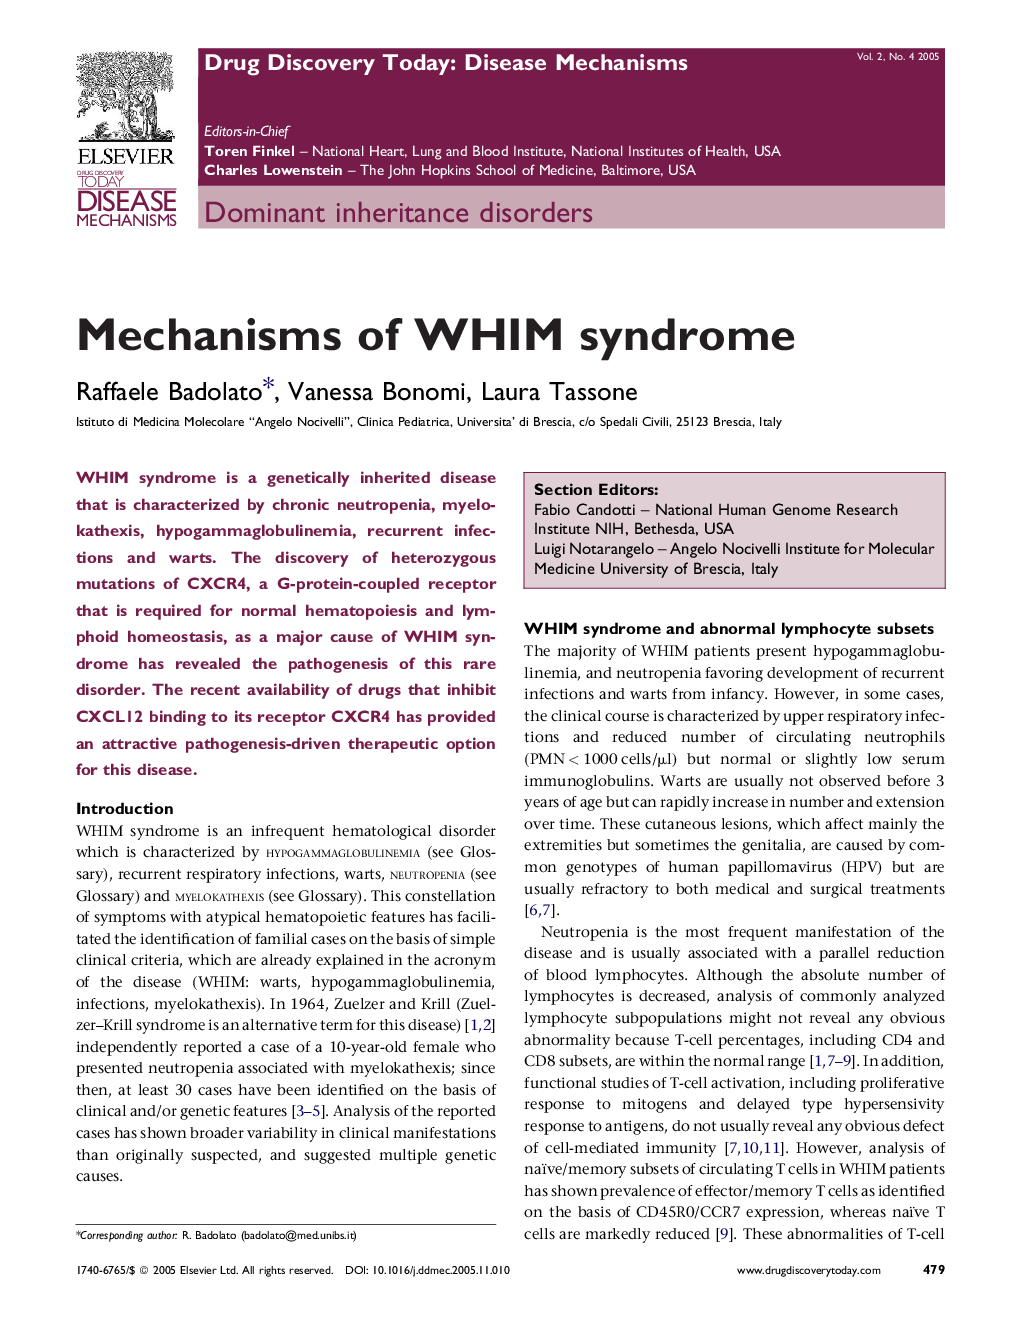 Mechanisms of WHIM syndrome